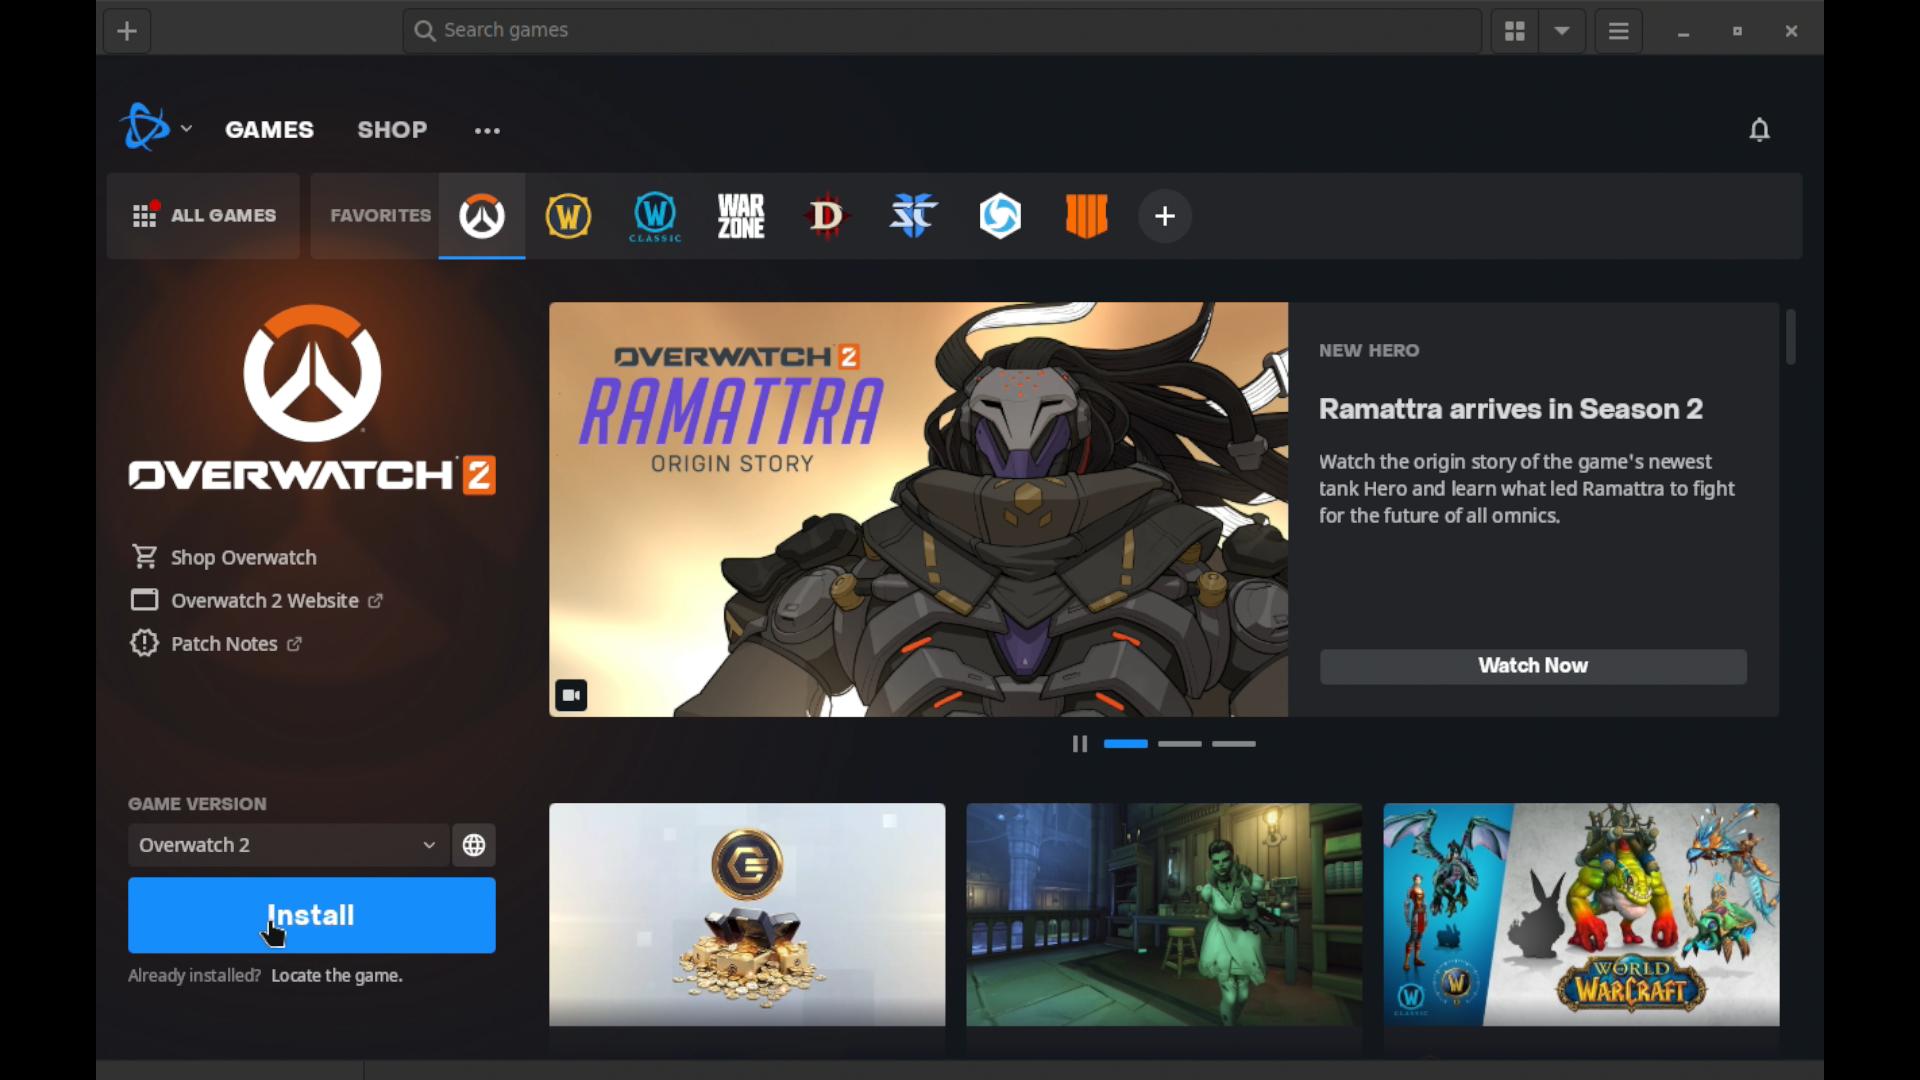 Here's how to play Overwatch 2 on Steam Deck / Linux